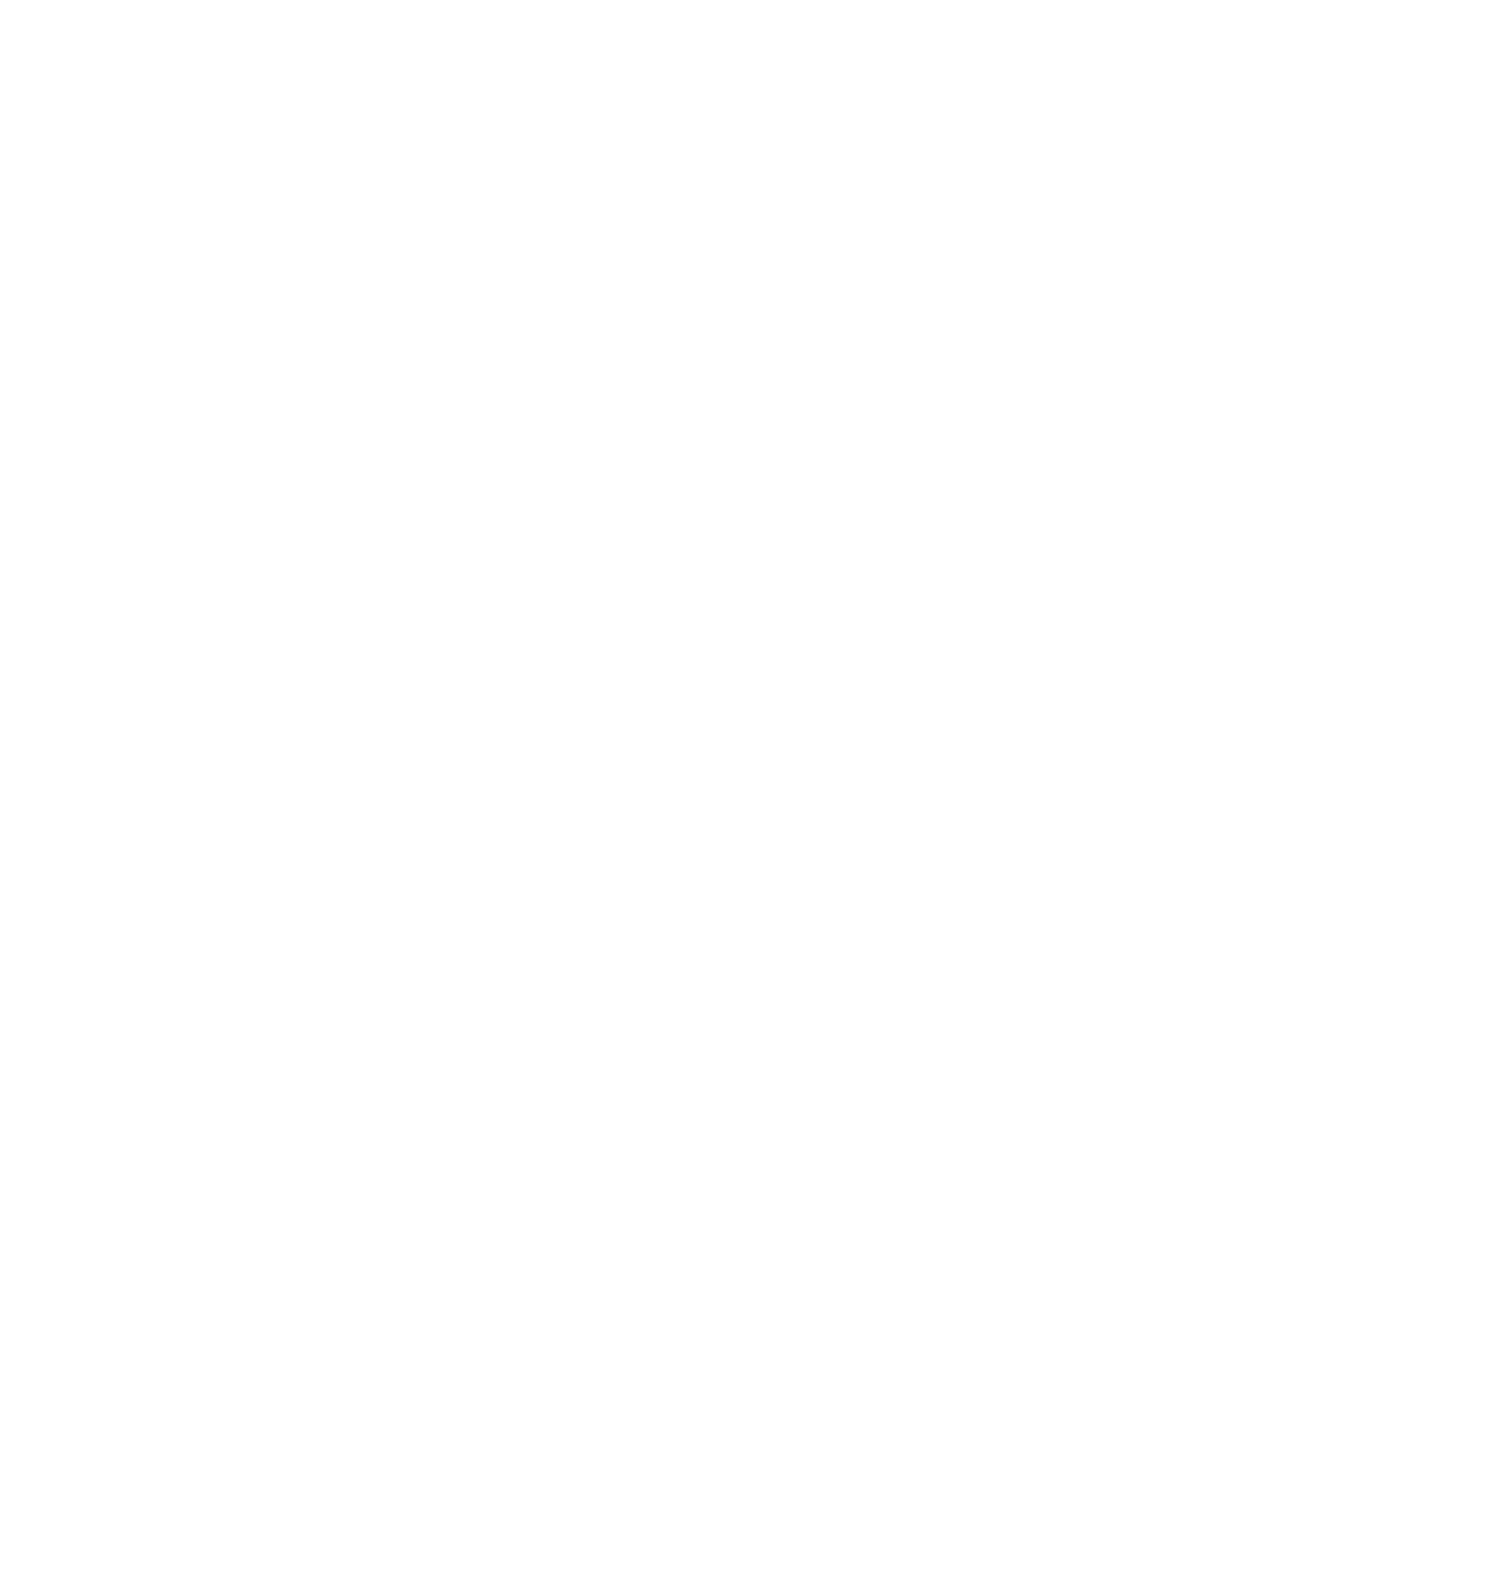 The Photo Booth Guys